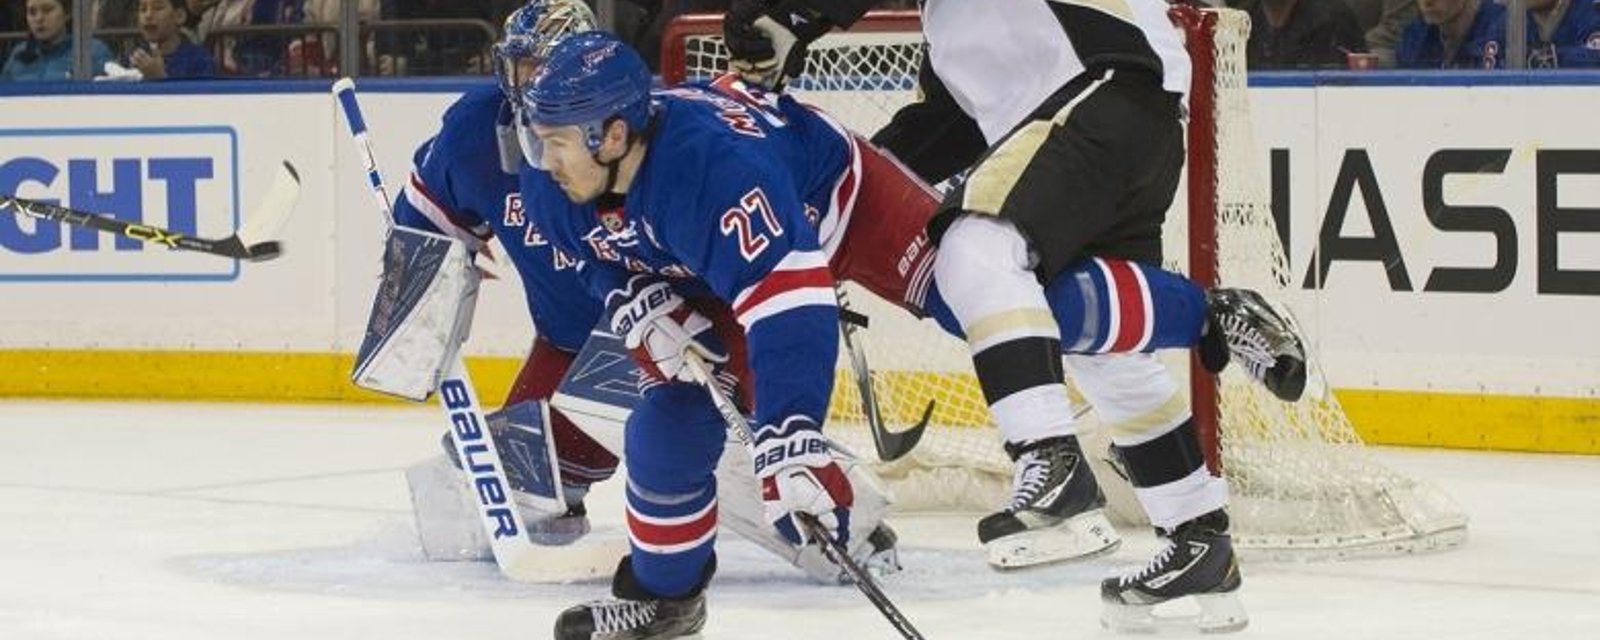 Rangers mulling call up, points to likely absence from McDonagh.